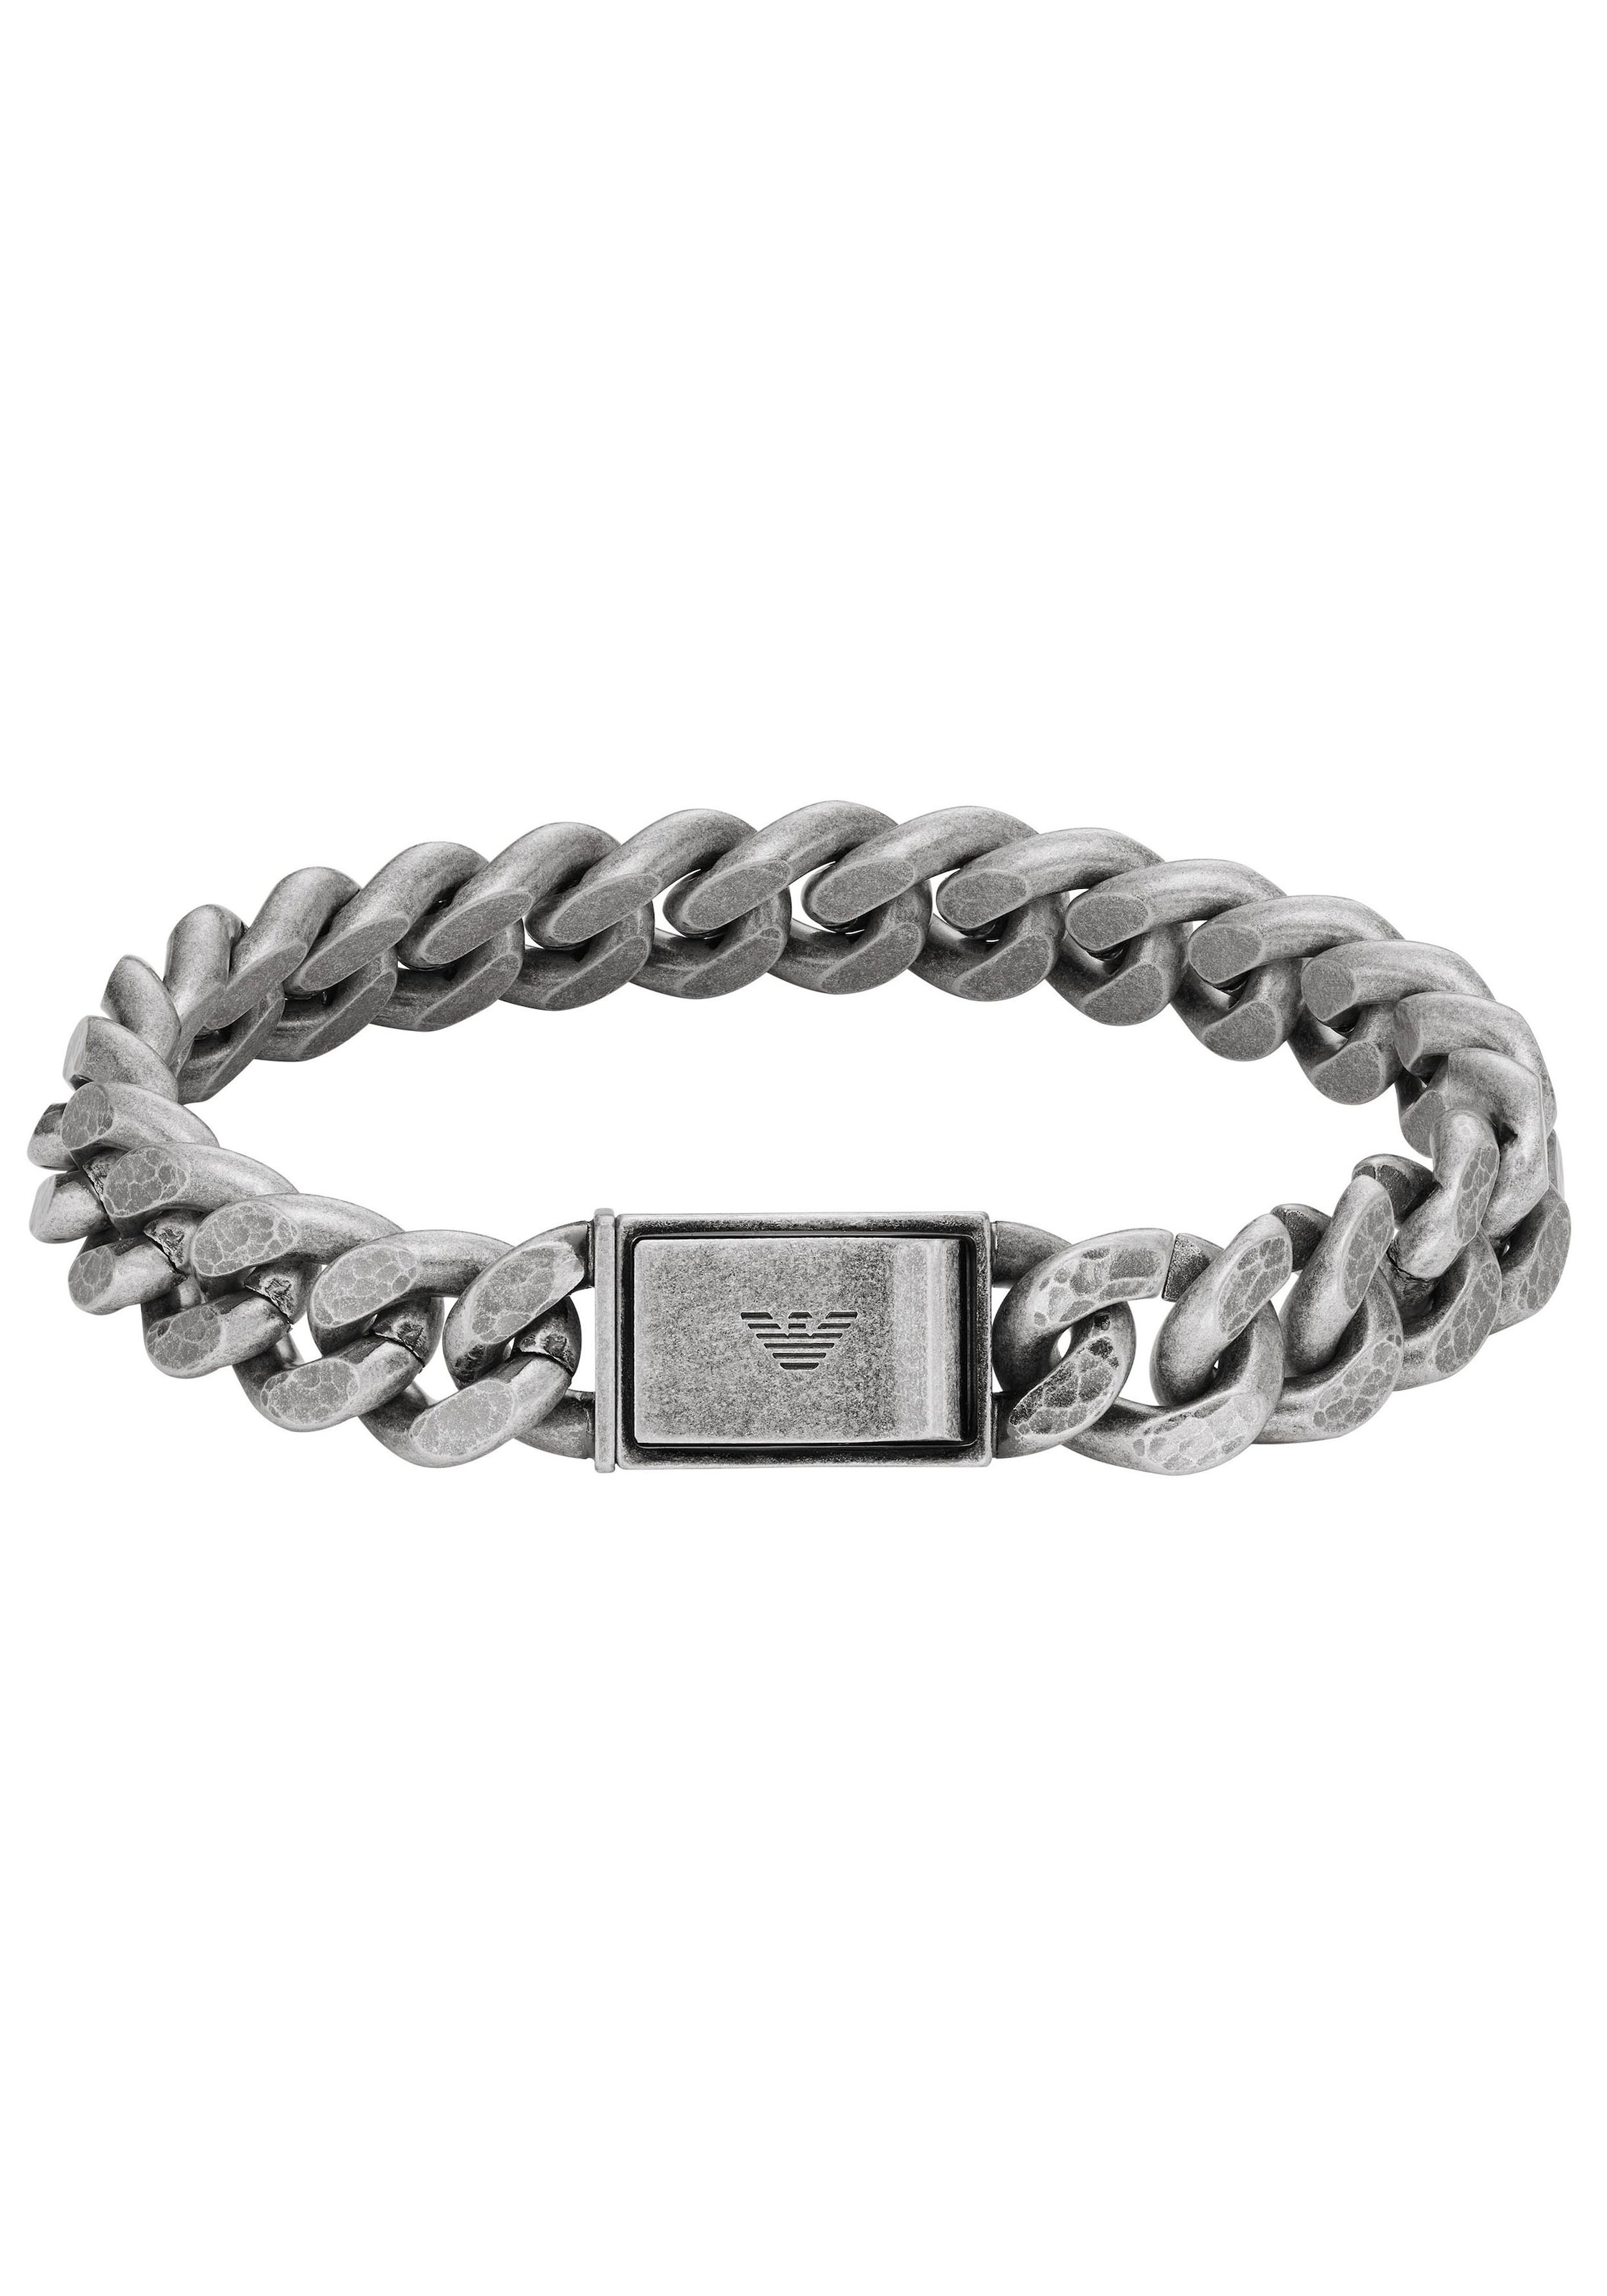 Armband Armani CHAINED, BAUR TREND, | »ICONIC Emporio EGS3036040«, Edelstahl